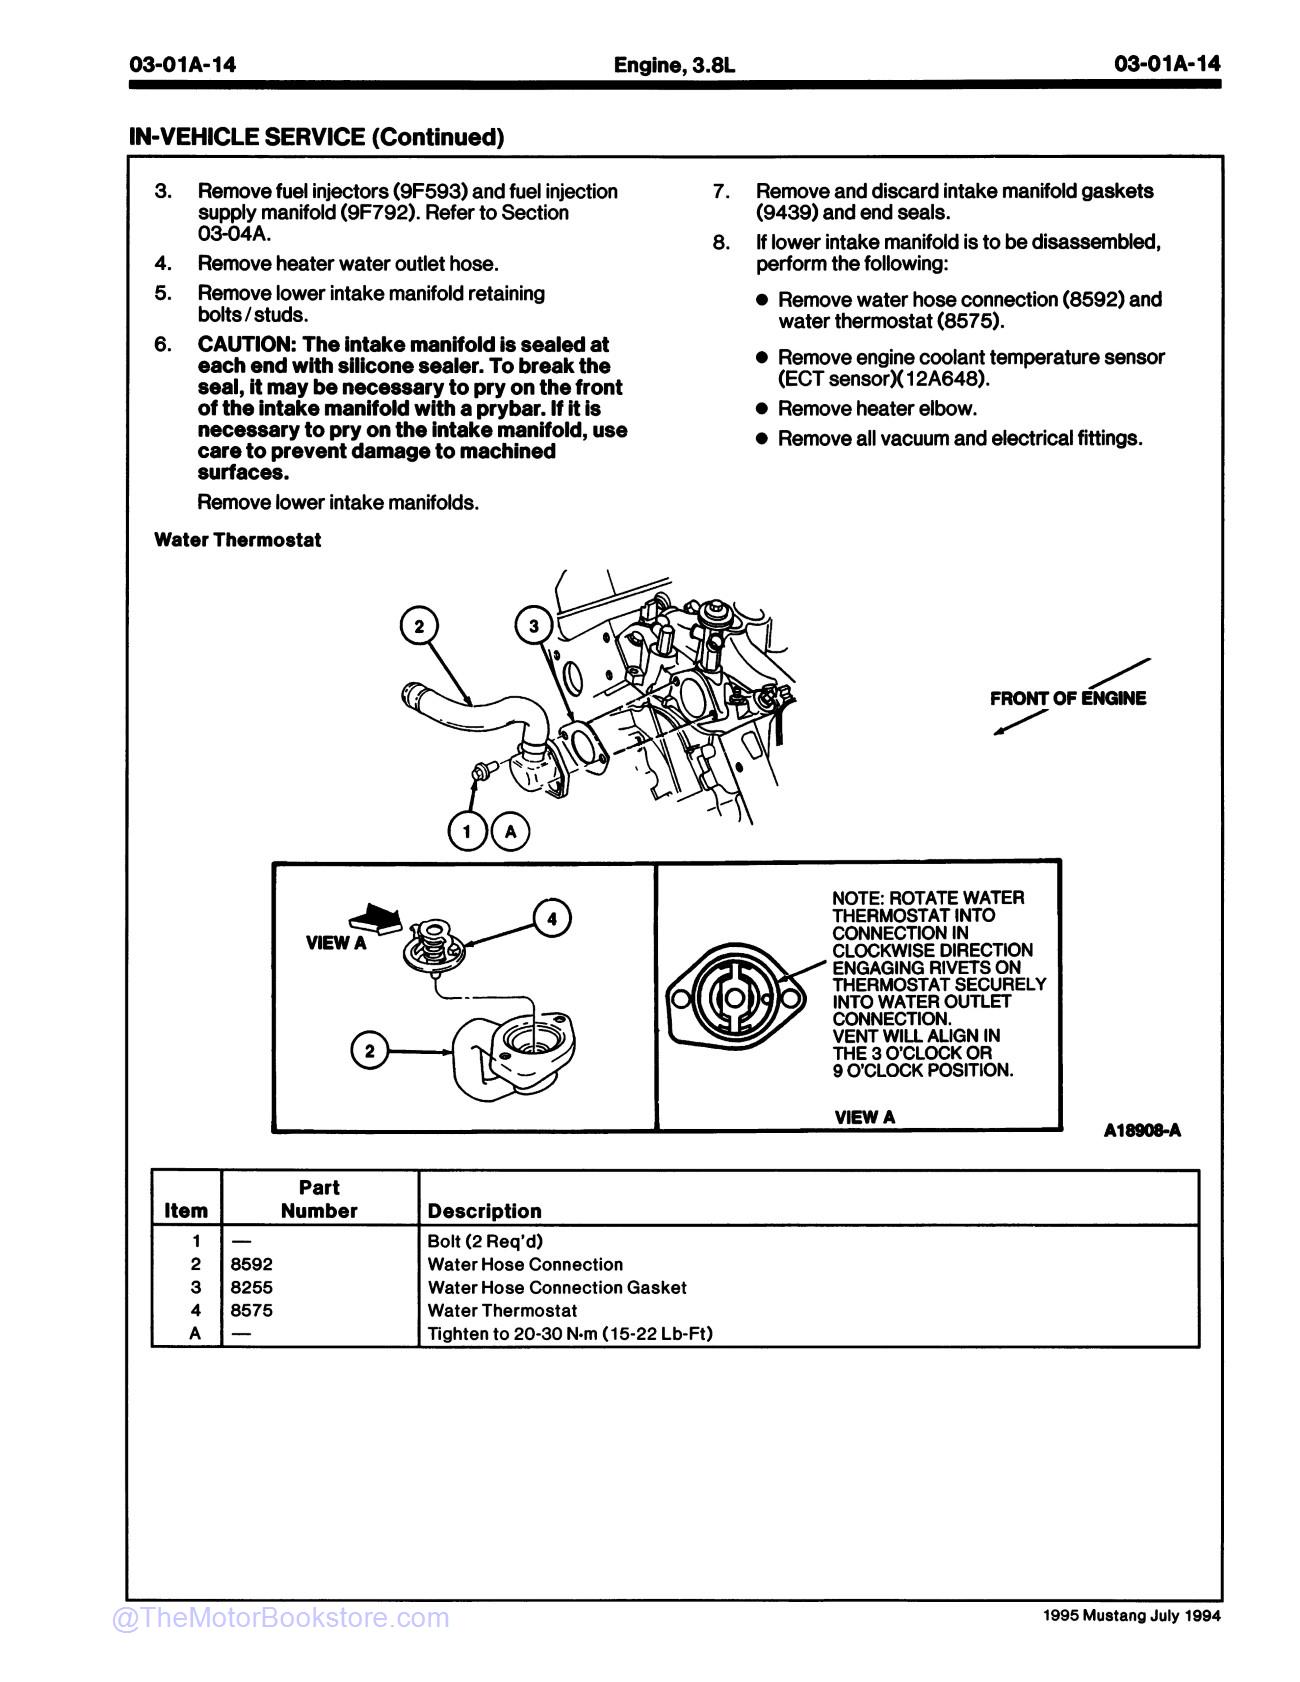 1995 Ford Mustang Service Manual - Sample Page 1